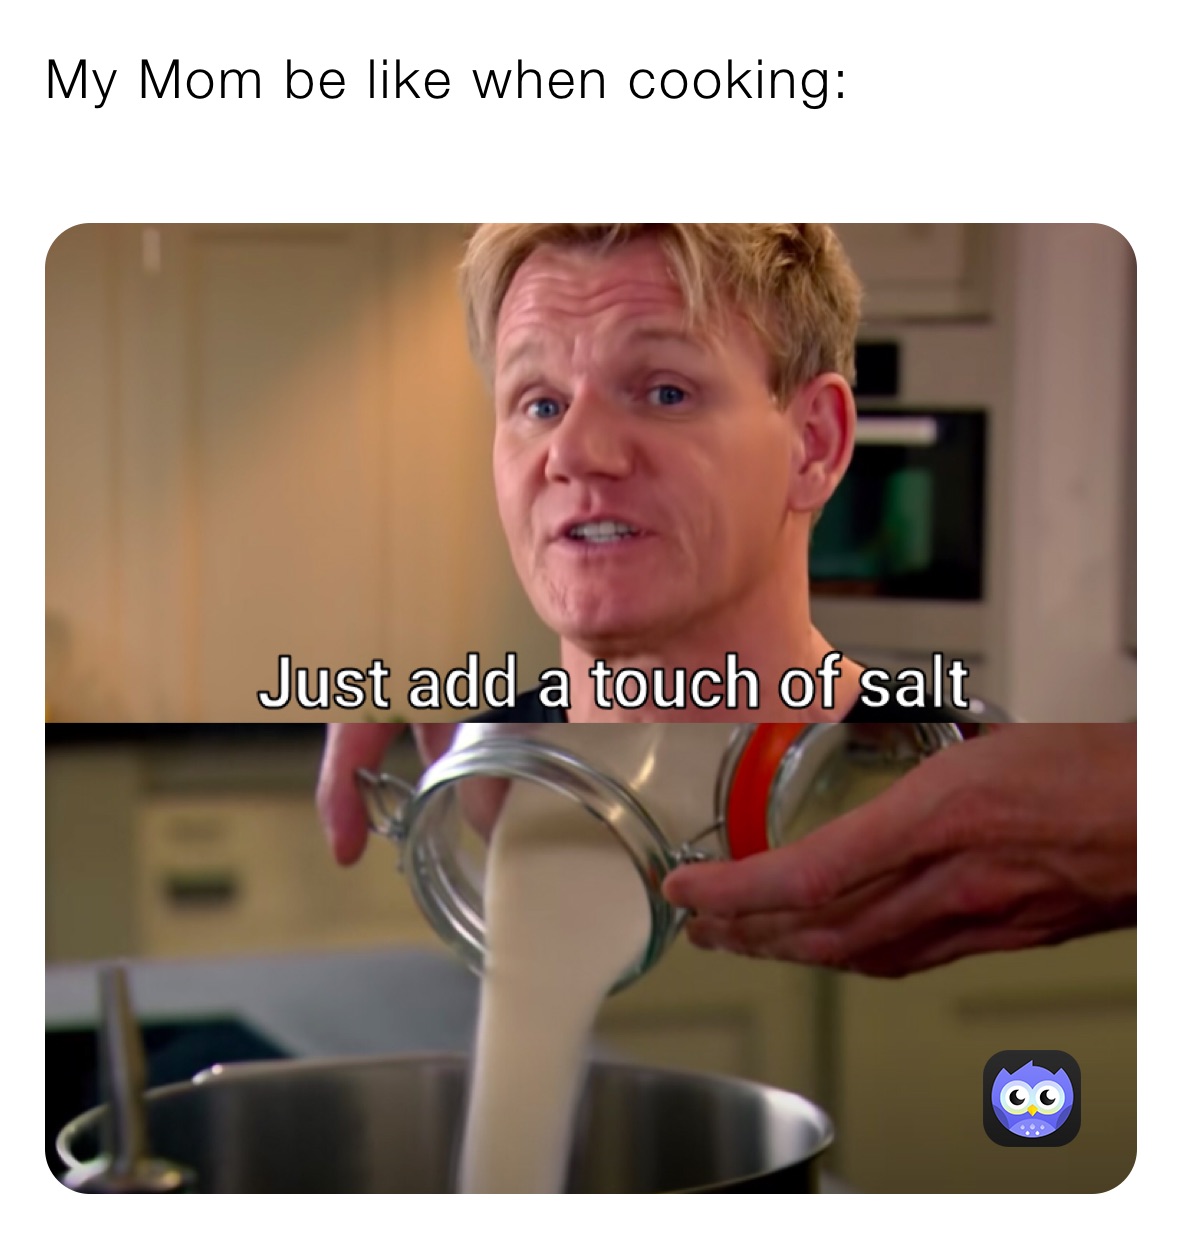 My Mom be like when cooking:
